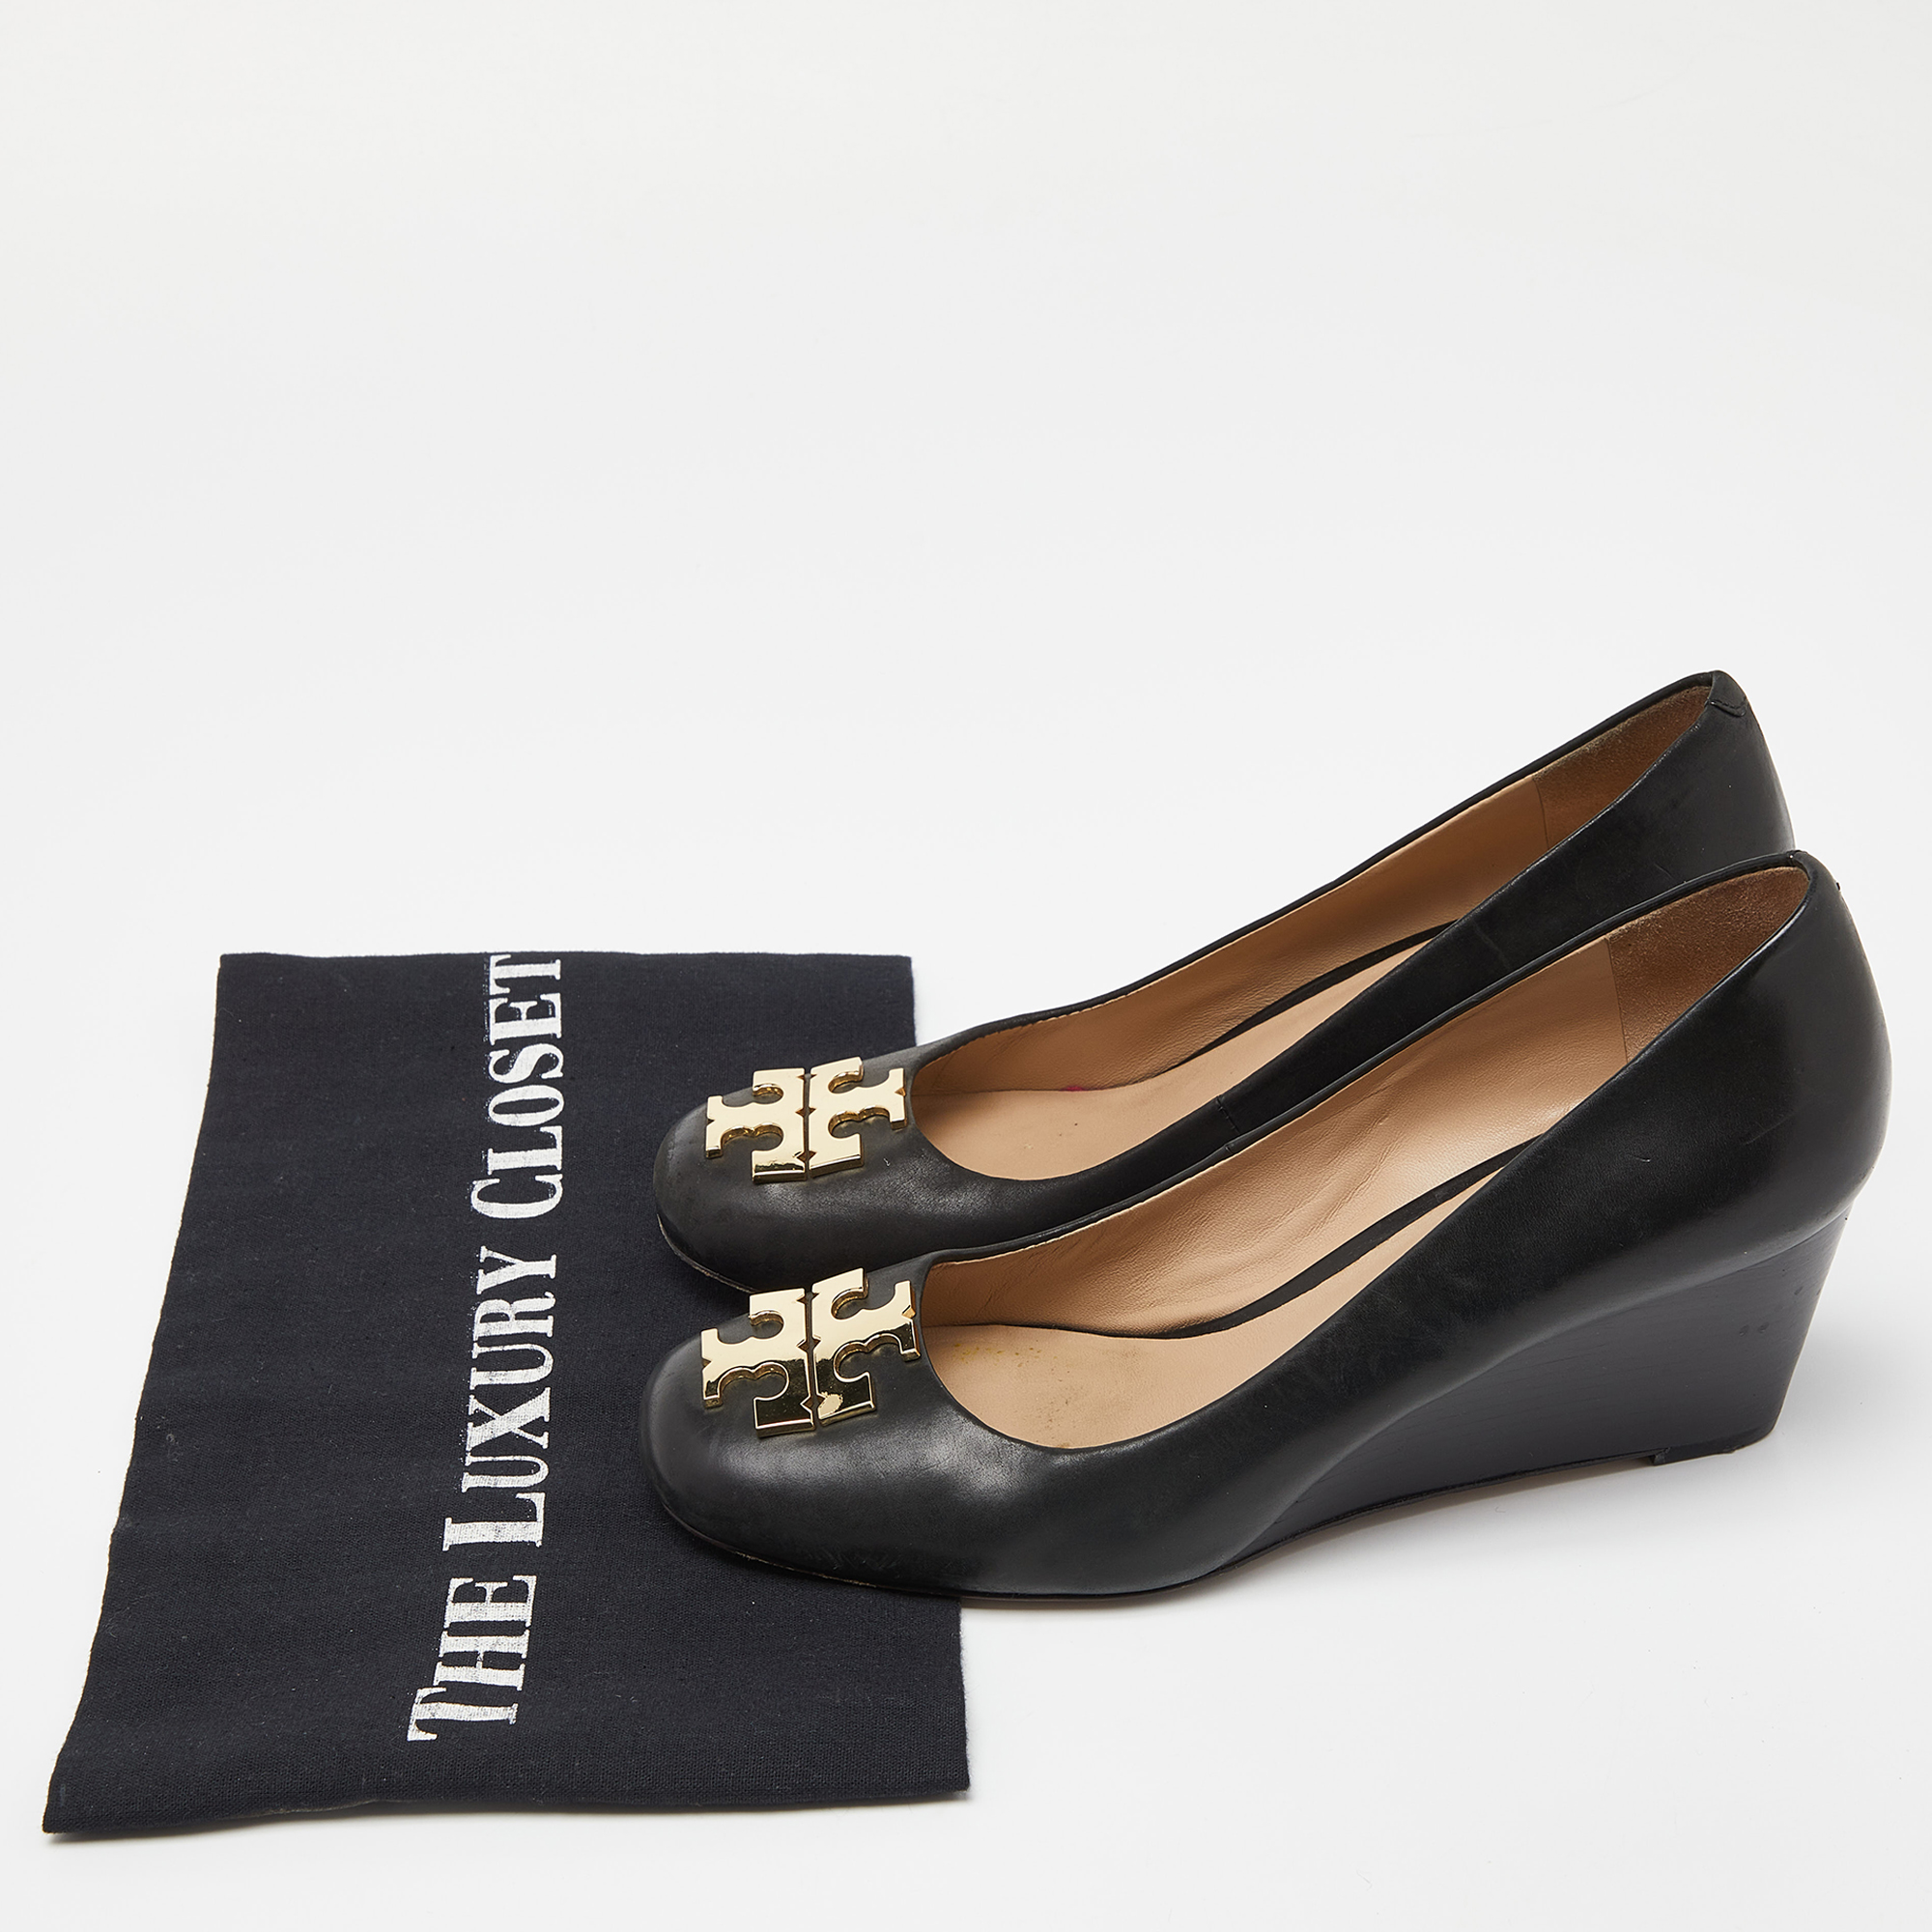 Tory Burch Black Leather Wedge Pumps Size 36.5